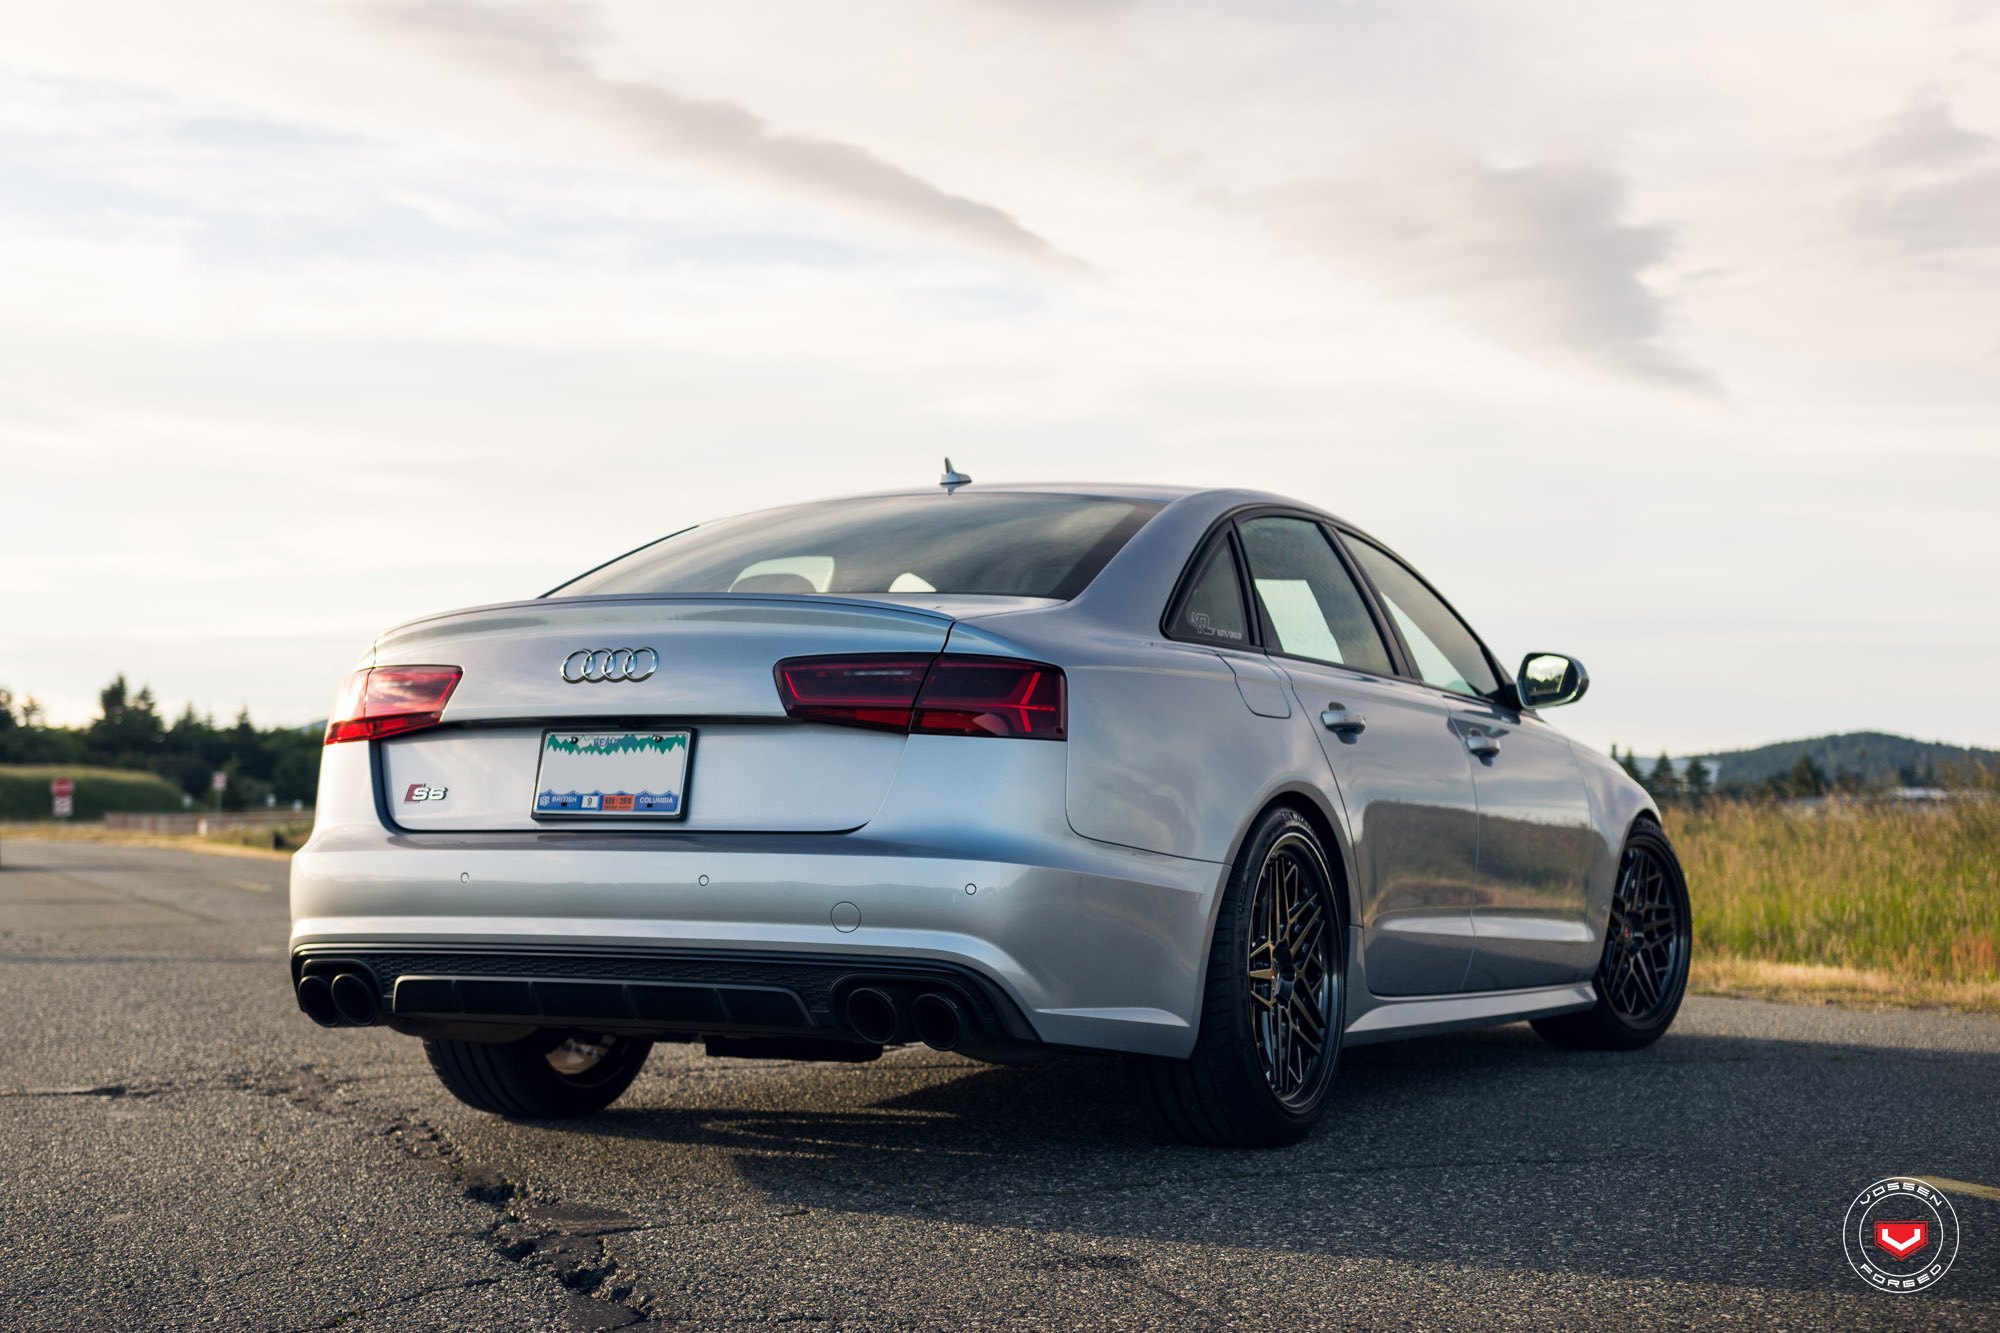 Custom Rear Diffuser on Silver Audi S6 - Photo by Vossen